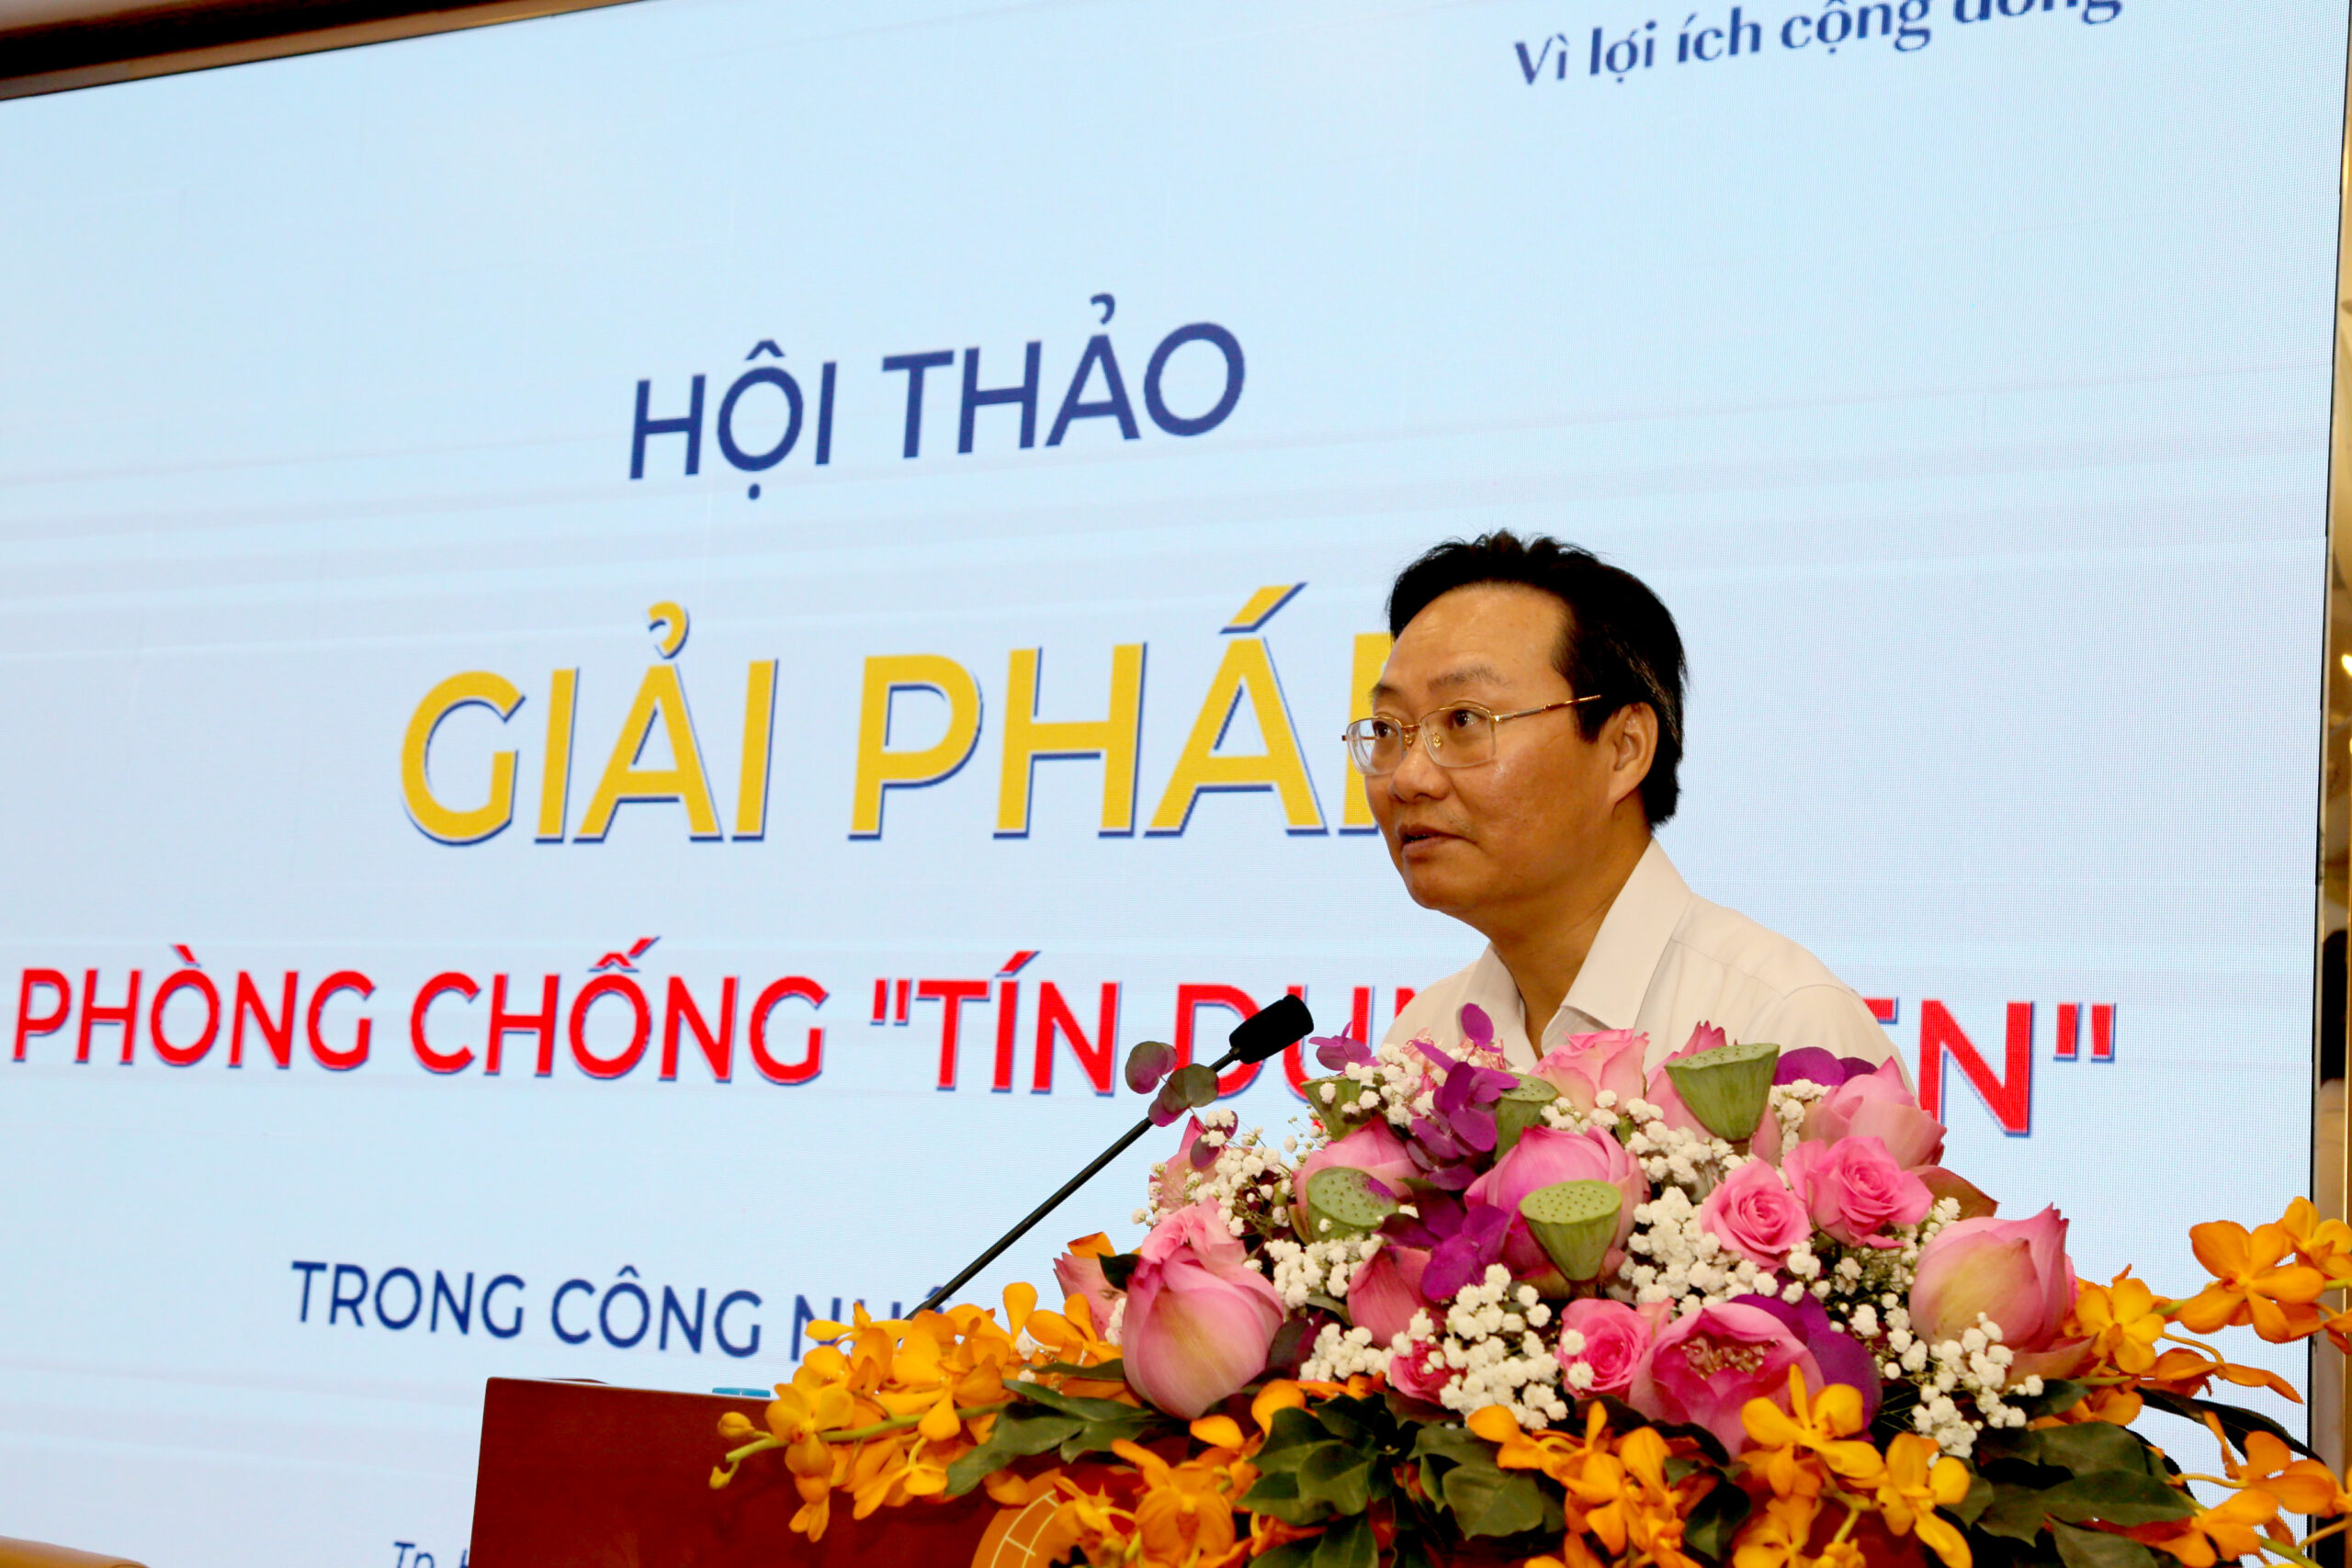 Mr Hoang Van Thanh (Chairman of the Board of Members of CEP) made concluding remarks and expressed gratitude to the participants at the workshop